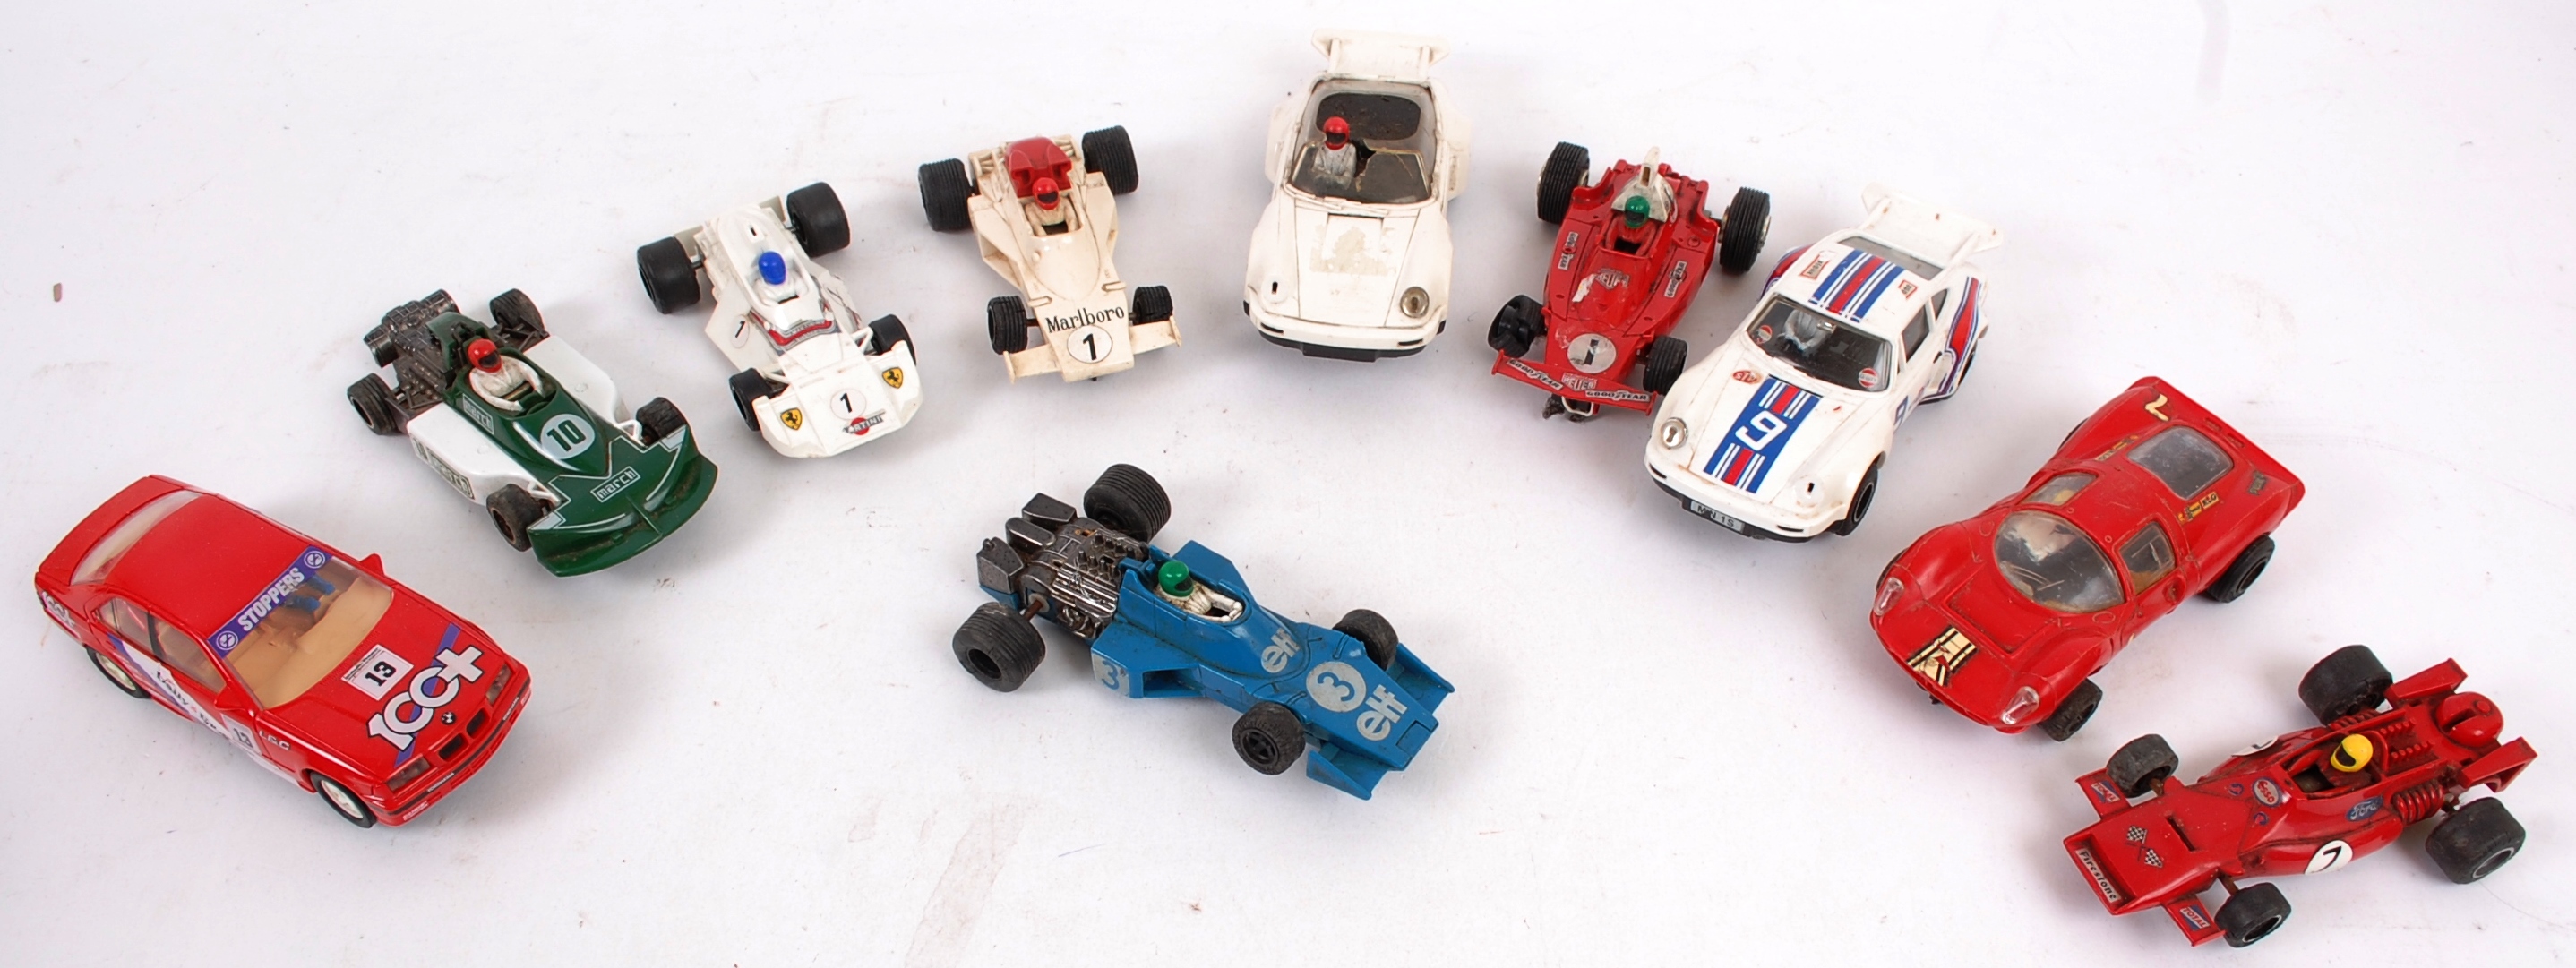 SCALEXTRIC; A collection of 10x assorted loose Scalextric racing cars.